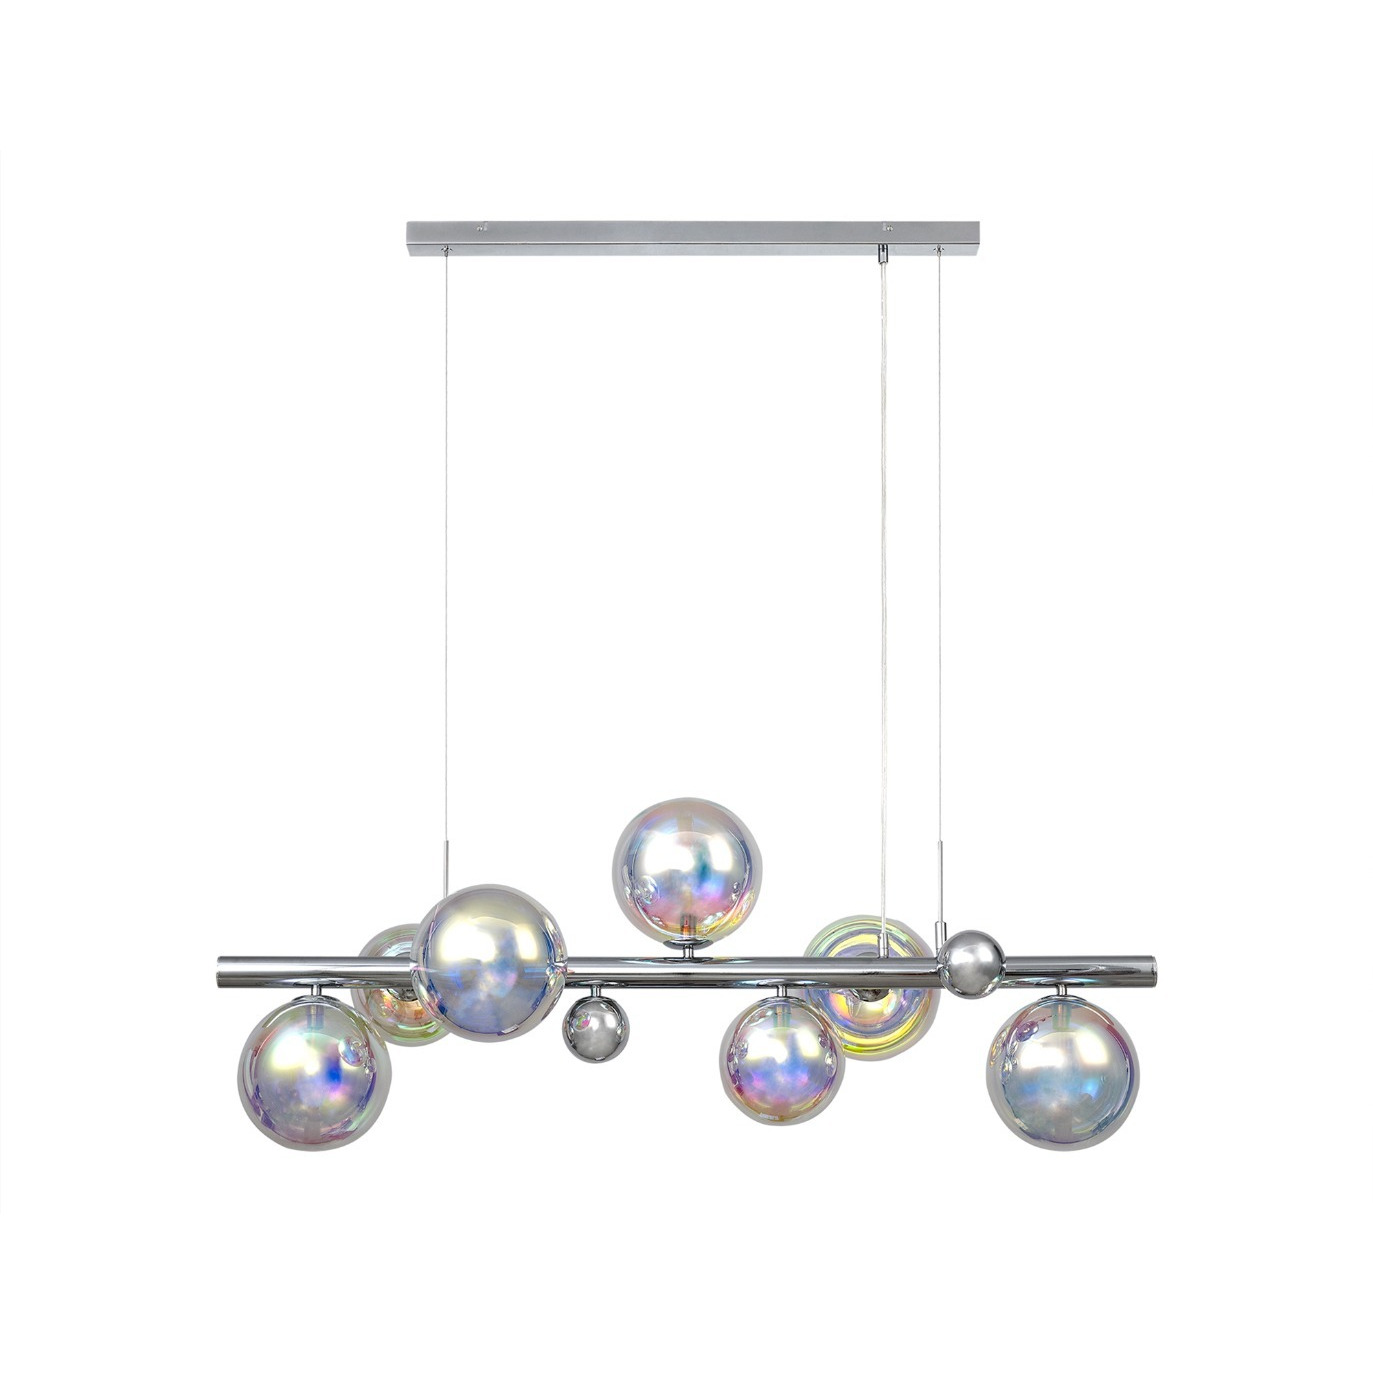 System 7 Light Ceiling Pendant In Chrome Finish With Iridescent Glass Shades